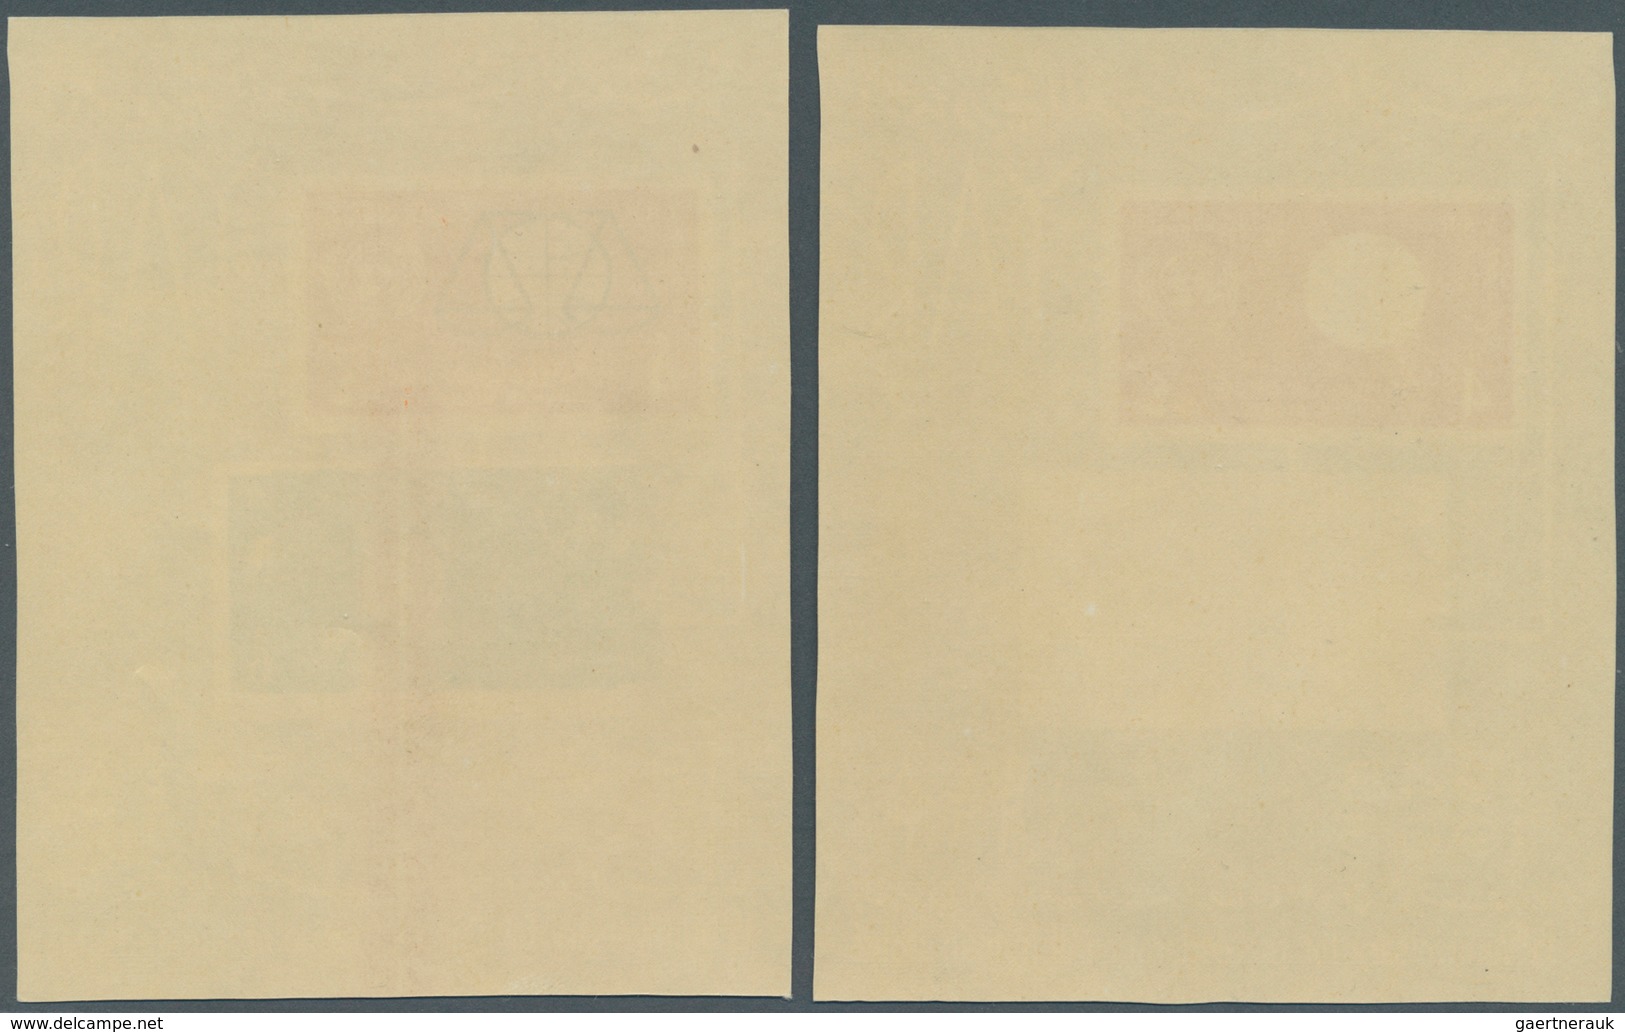 09103 Jemen: 1963, 15th Anniversary of Declaration of Human Rights, group of seven souvenir sheets showing